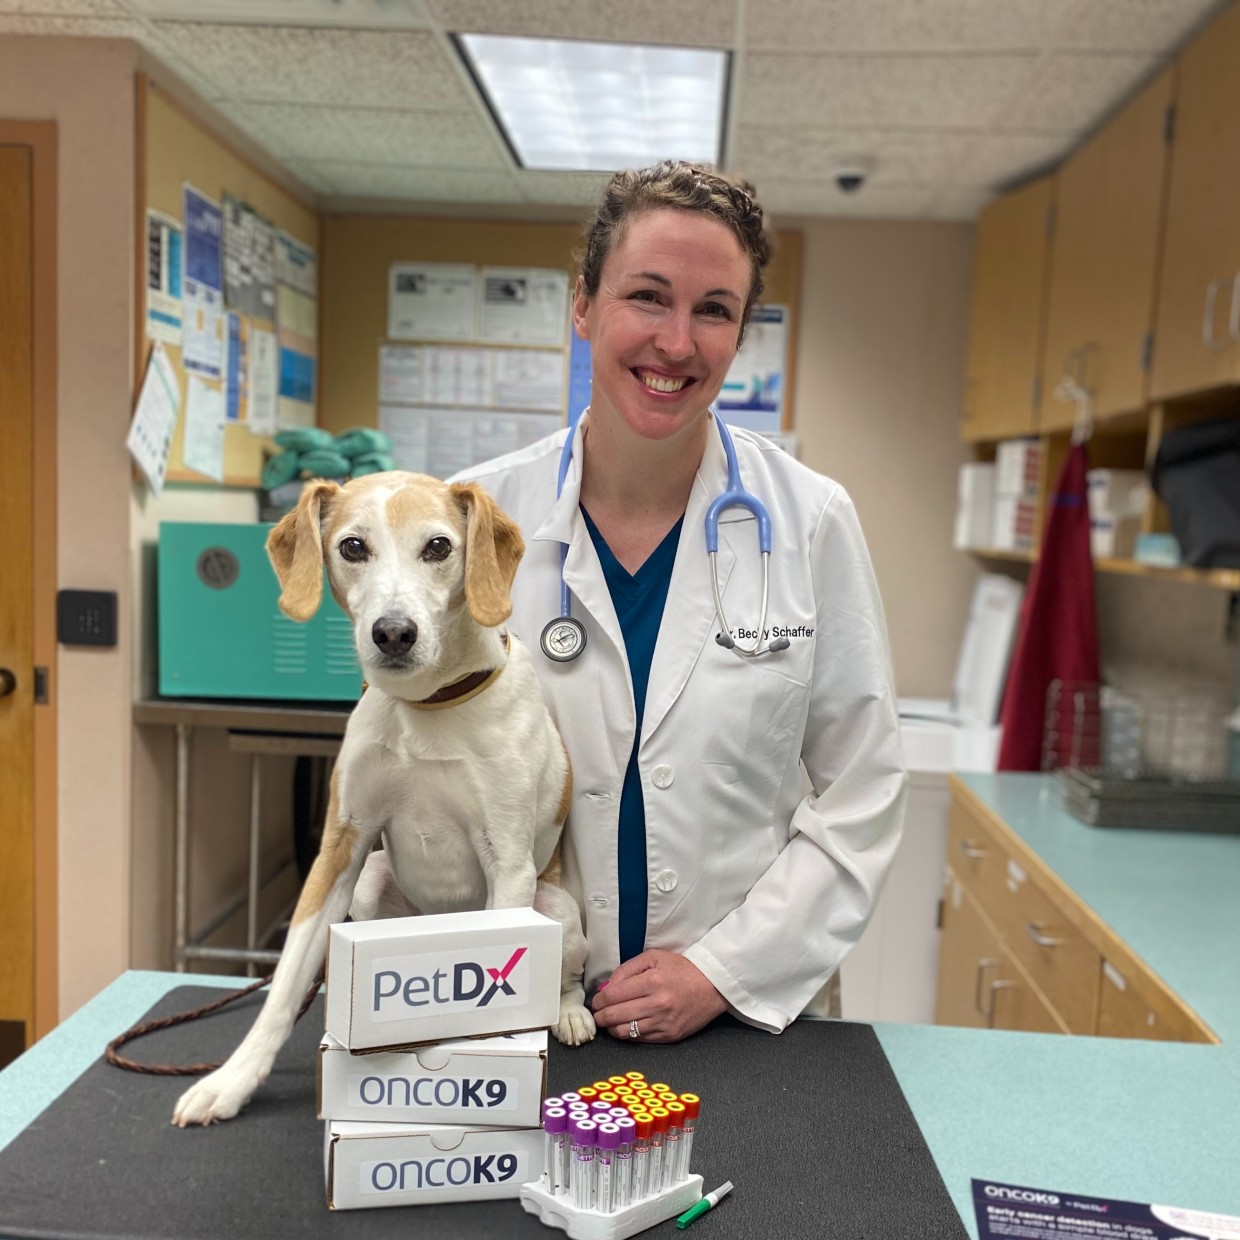 Dr. Schaffer and Jax pose with cancer-detecting blood test OncoK9.